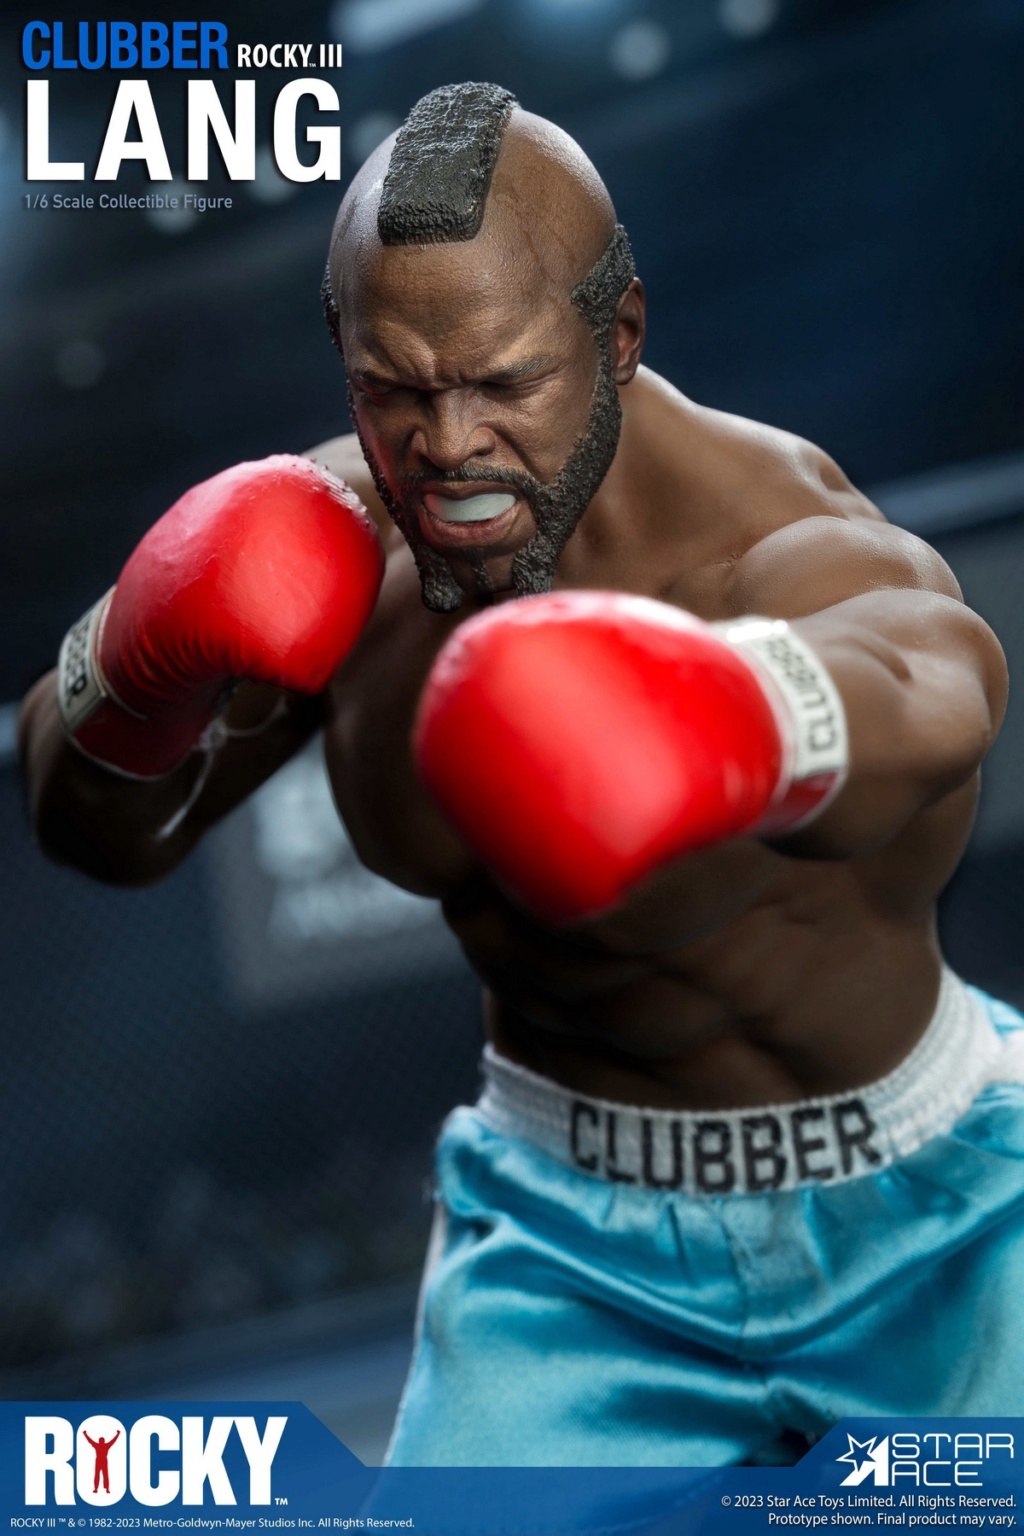 newproduct - NEW PRODUCT: Star Ace Toys: 1/6 scale Rocky III: Clubber Lang action figure (standard & Deluxe) 11281410